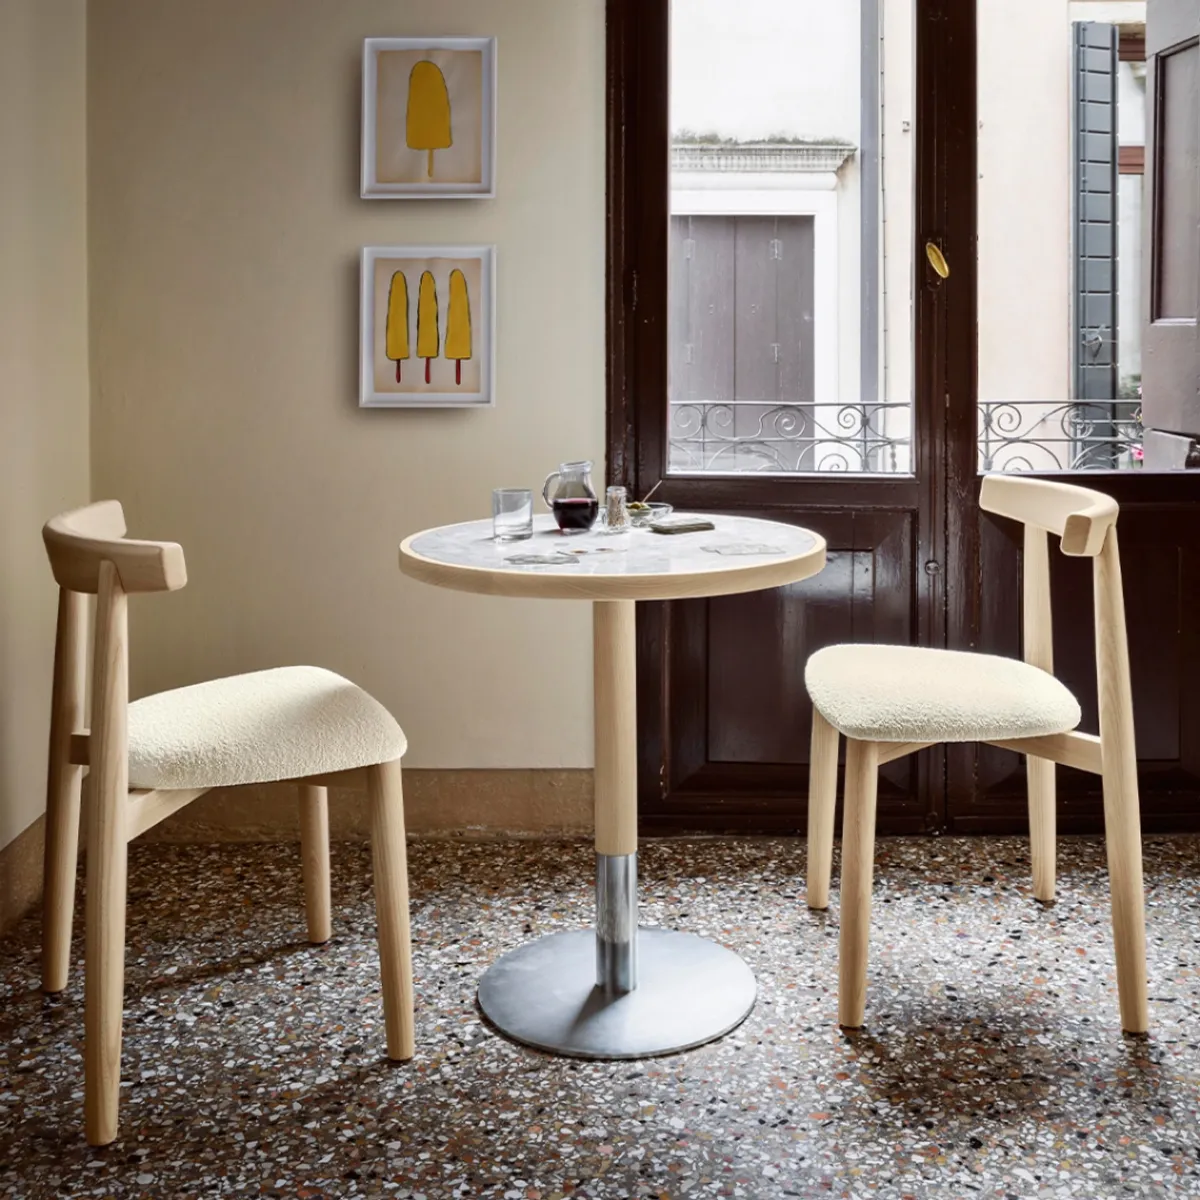 Briscola dining table 6